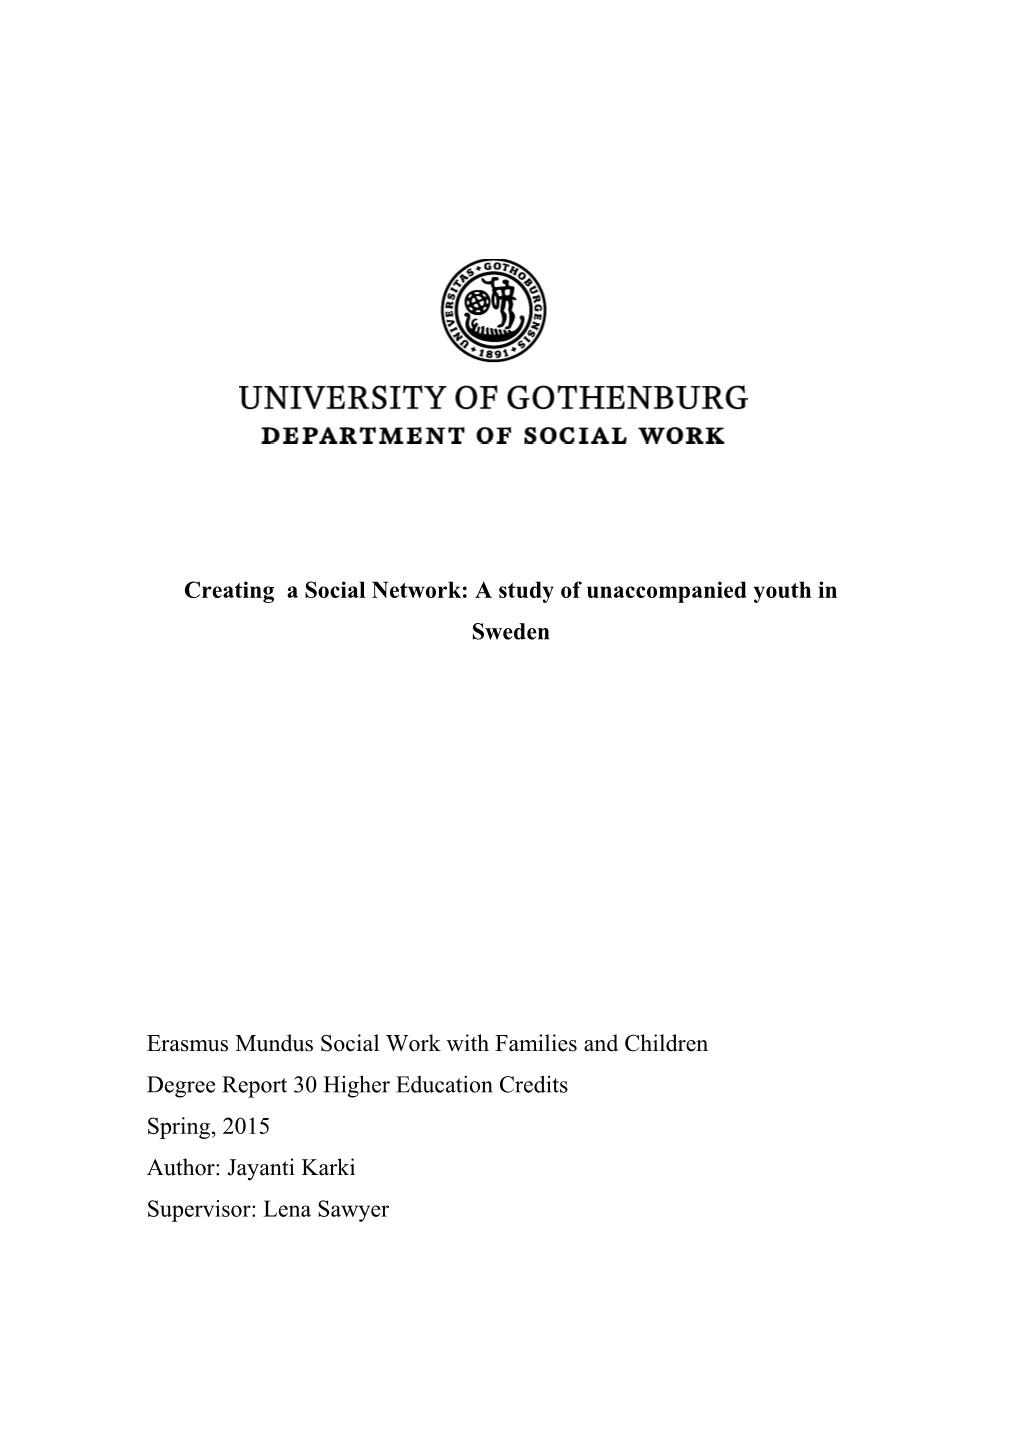 Creating a Social Network: a Study of Unaccompanied Youth in Sweden